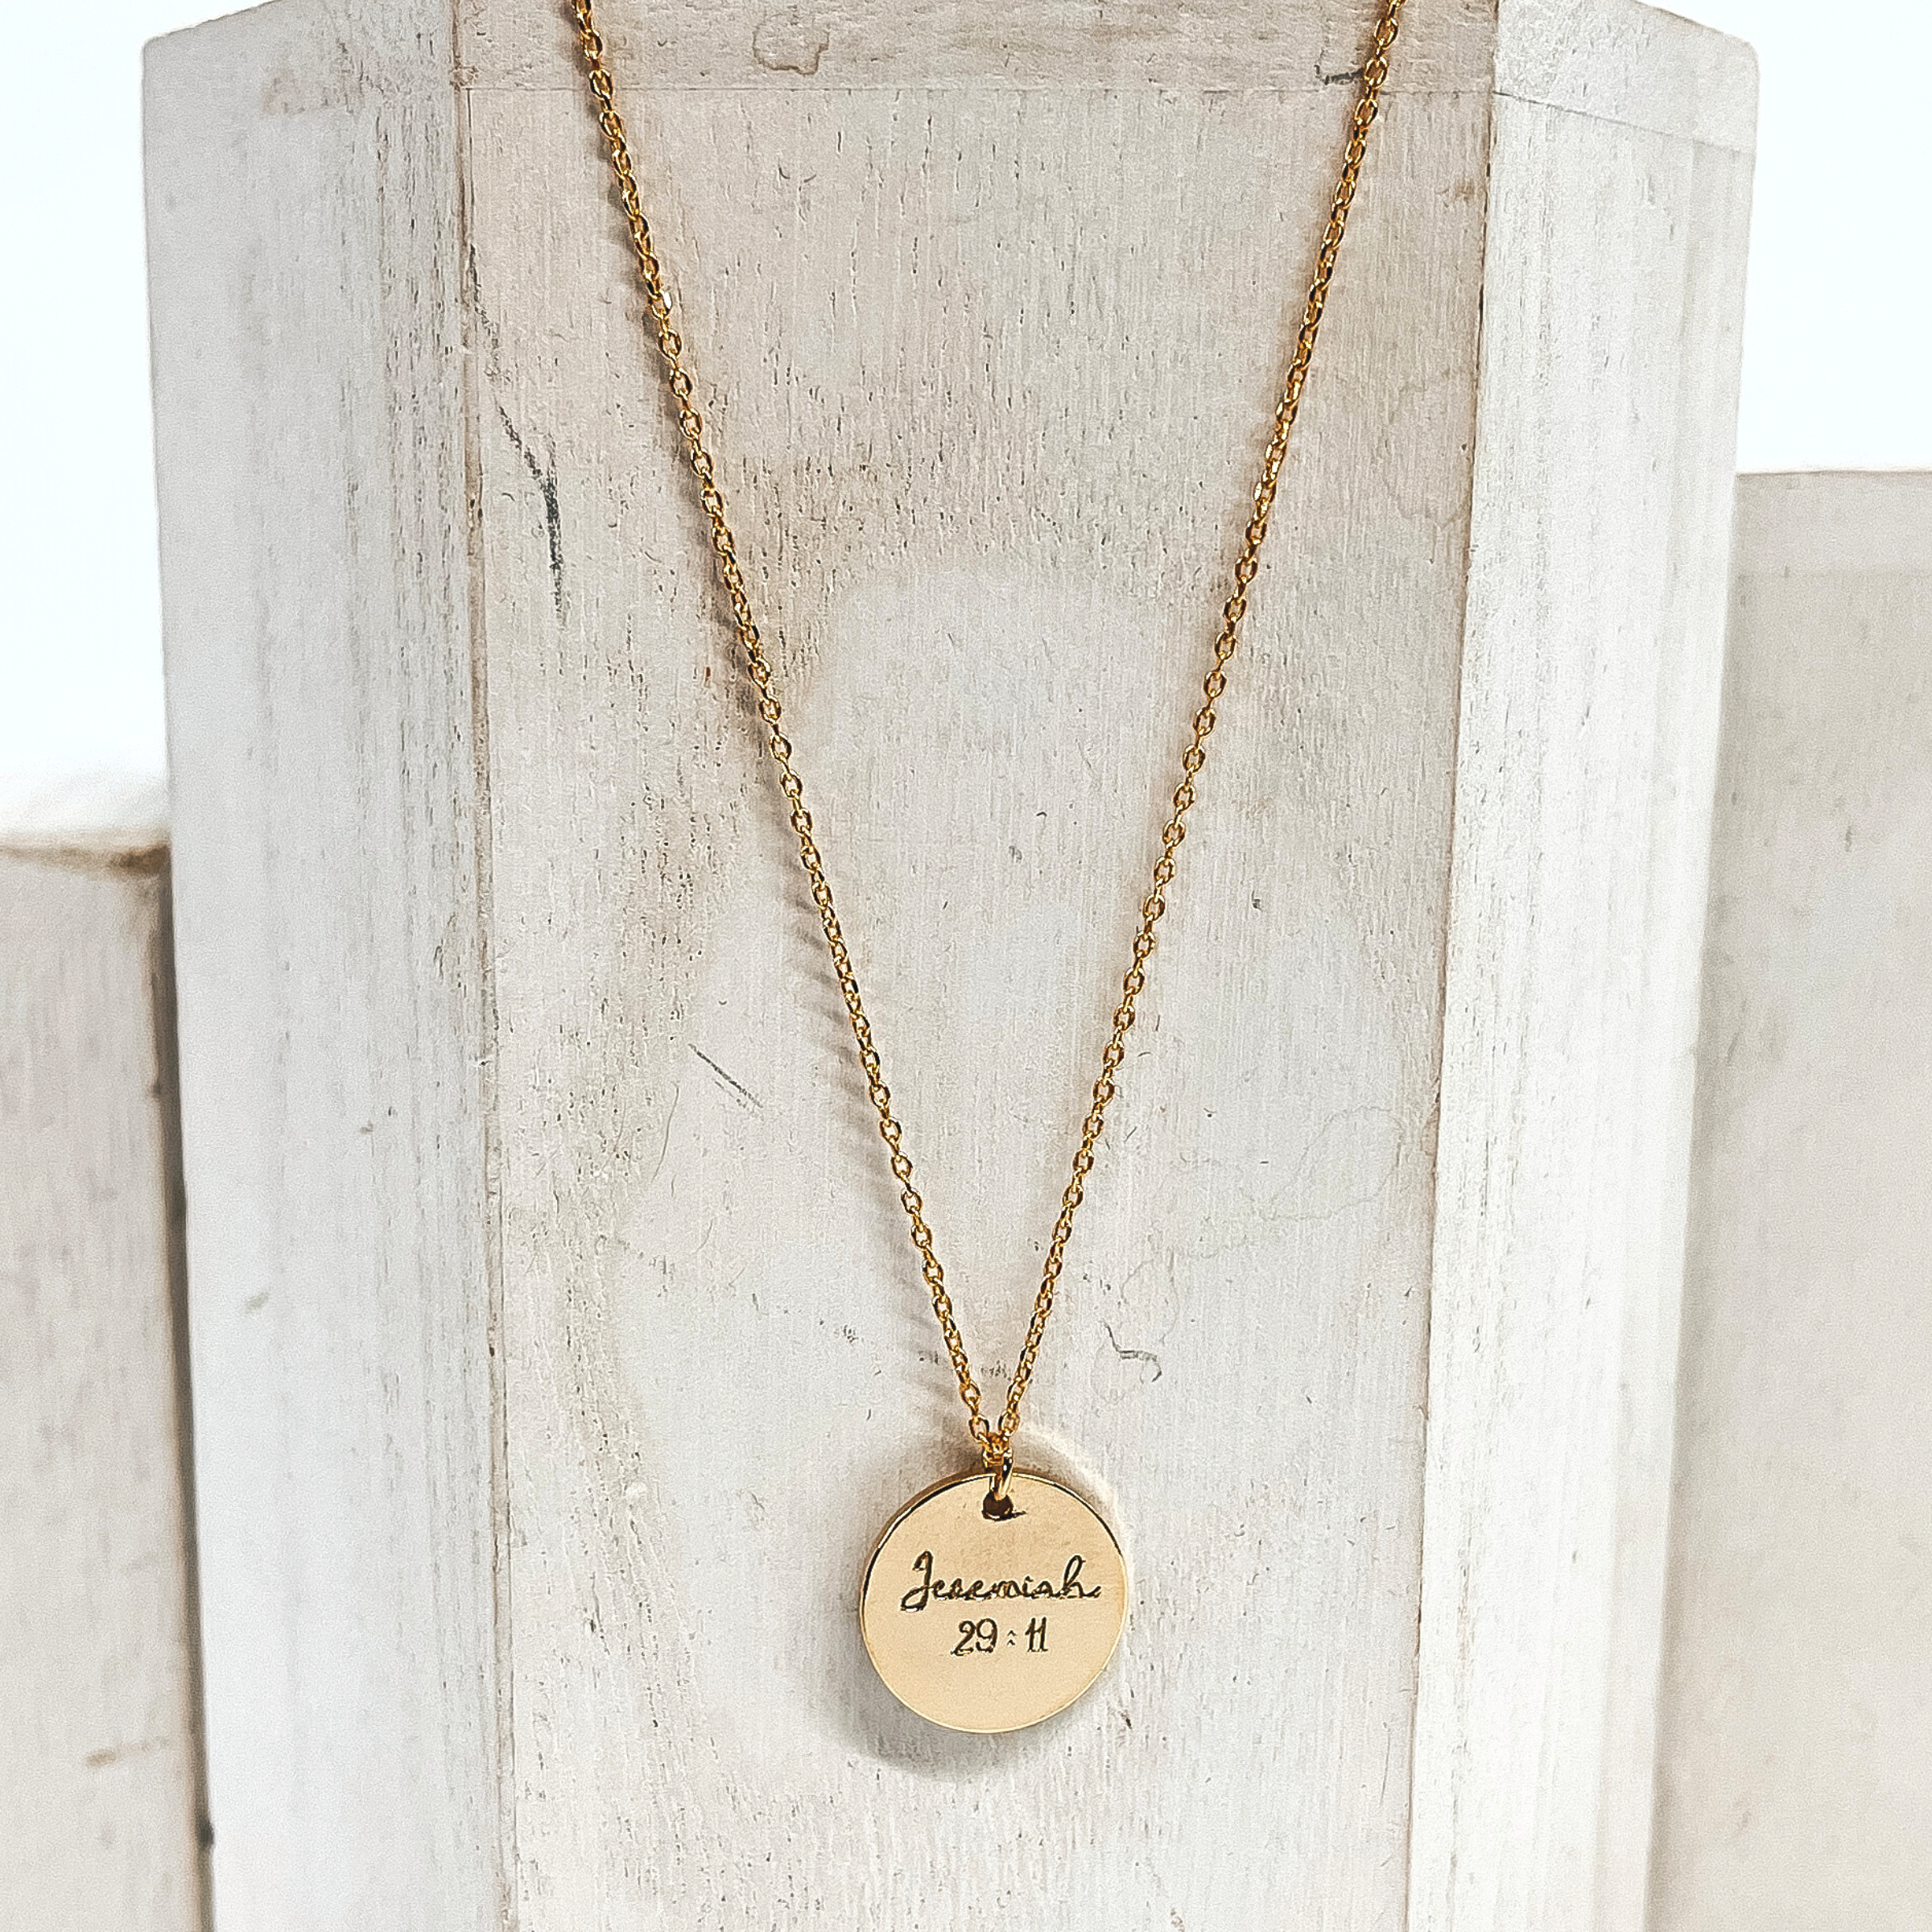 This is a gold thin necklace with a circle pendant that says, Jeremiah 29:11. This necklace is placed on a white block.